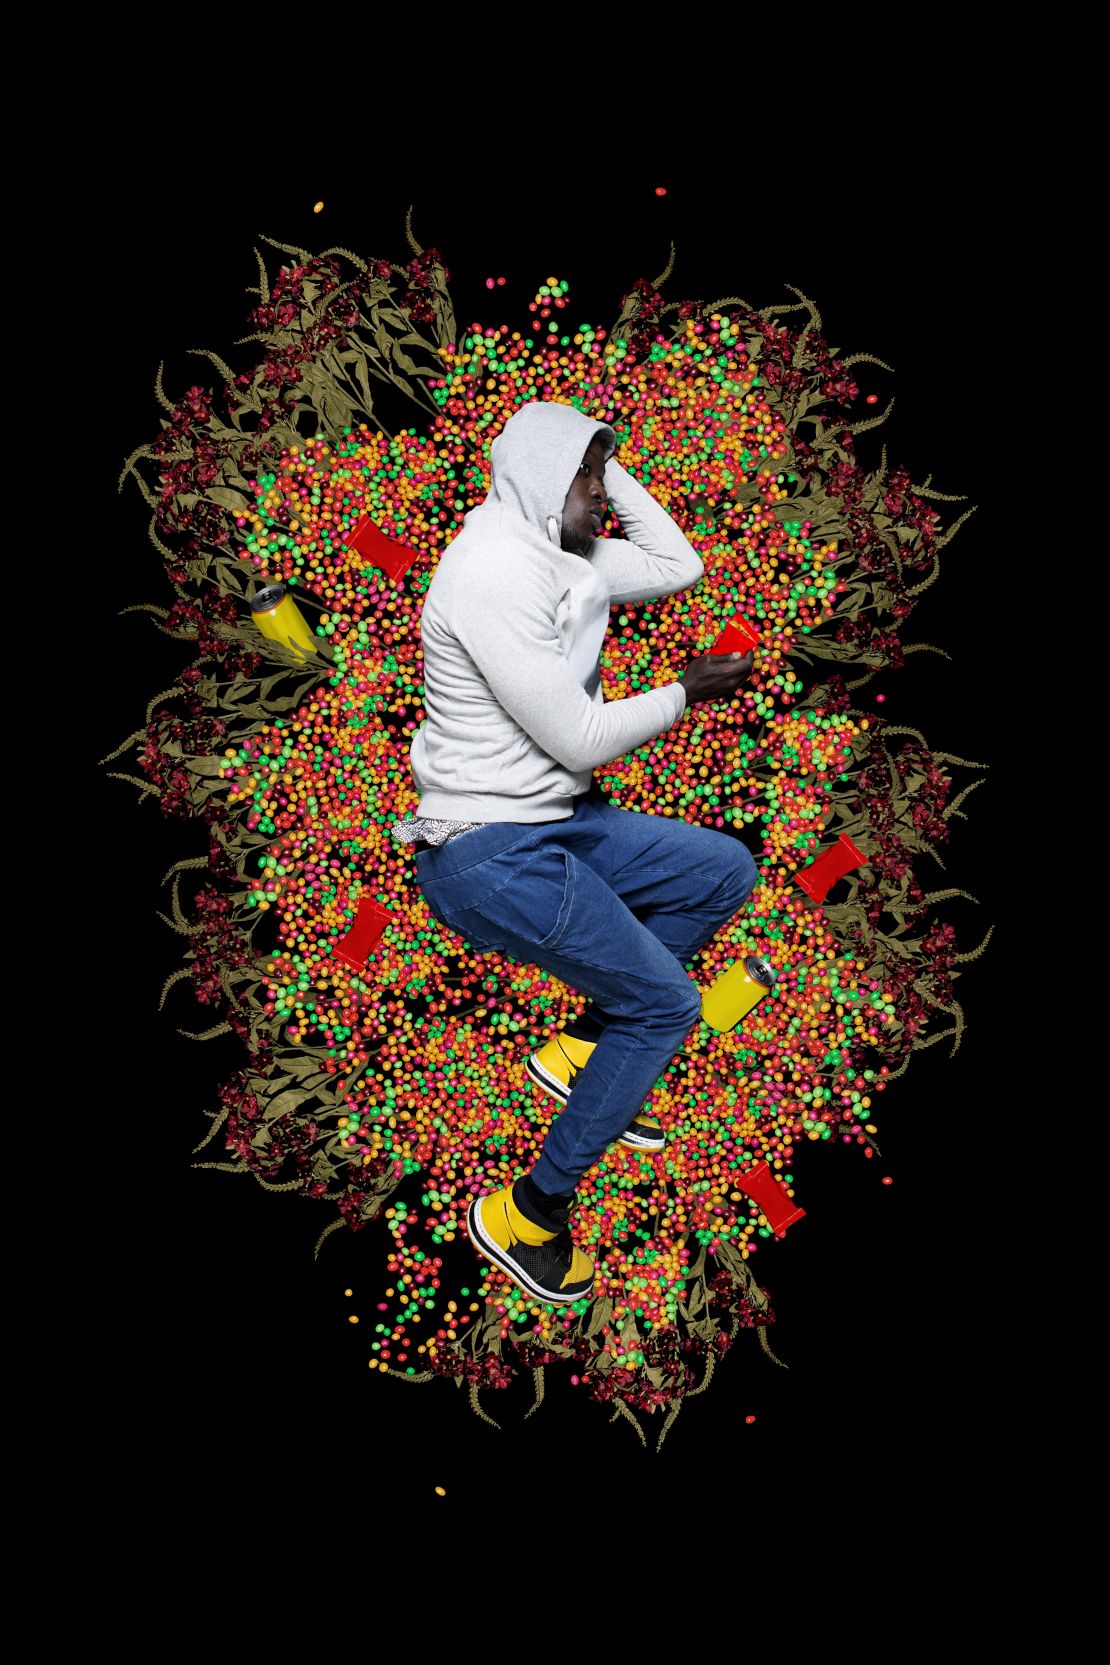 Diop represents each story of Black resistance through allegorical portraits. In this image, he plays the role of young Trayvon Martin, who was wearing a hoodie and had just bought a pack of Skittles when he was killed.